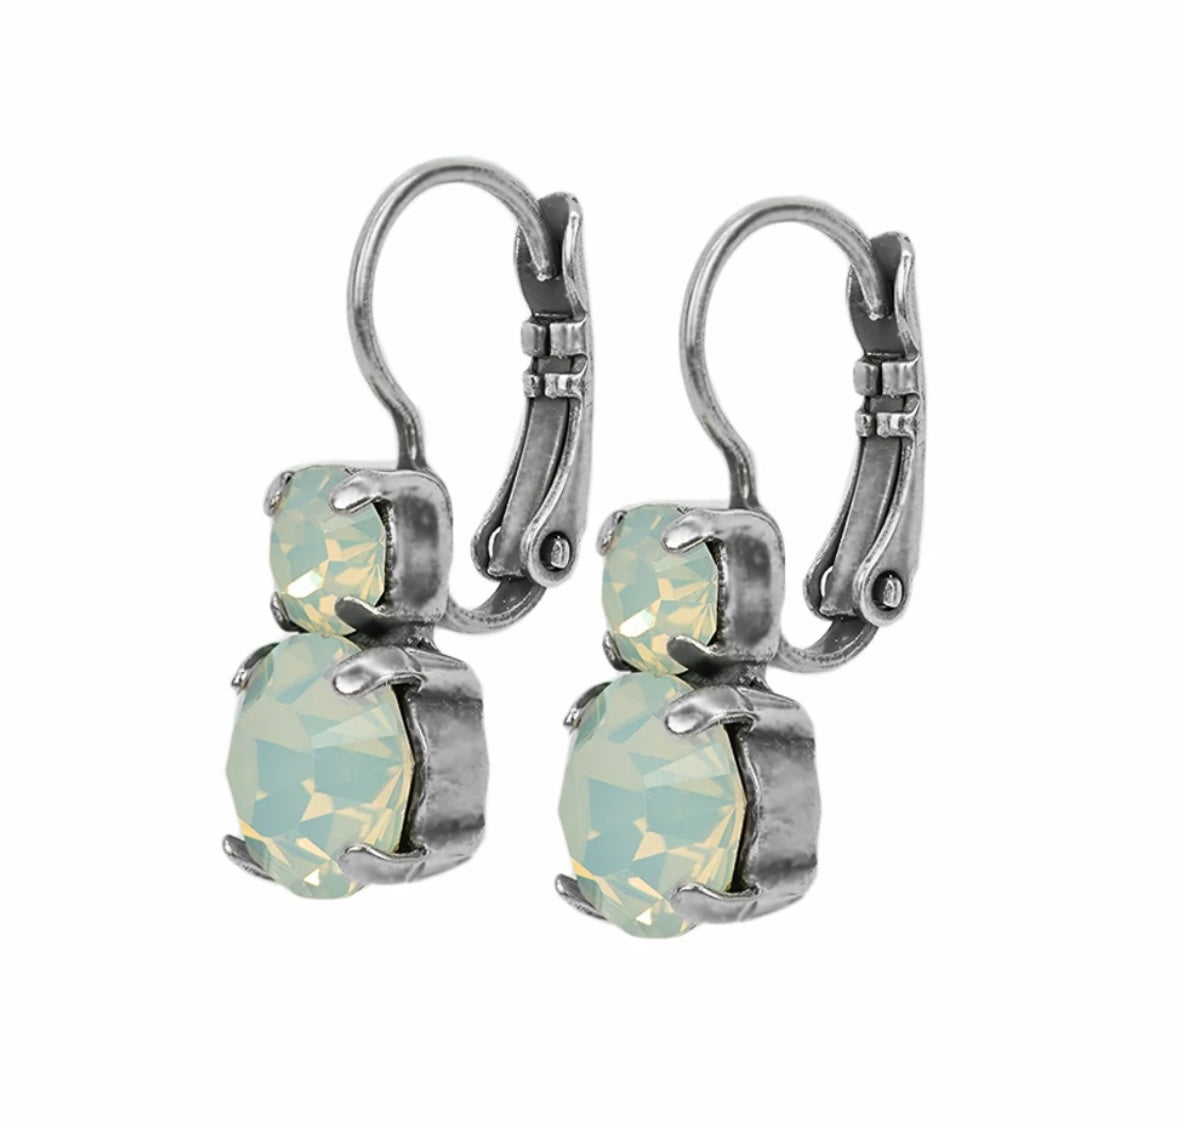 Mariana Antique Silver Must-Have Double Stone Crystal Leverback Earrings in “White Opal”